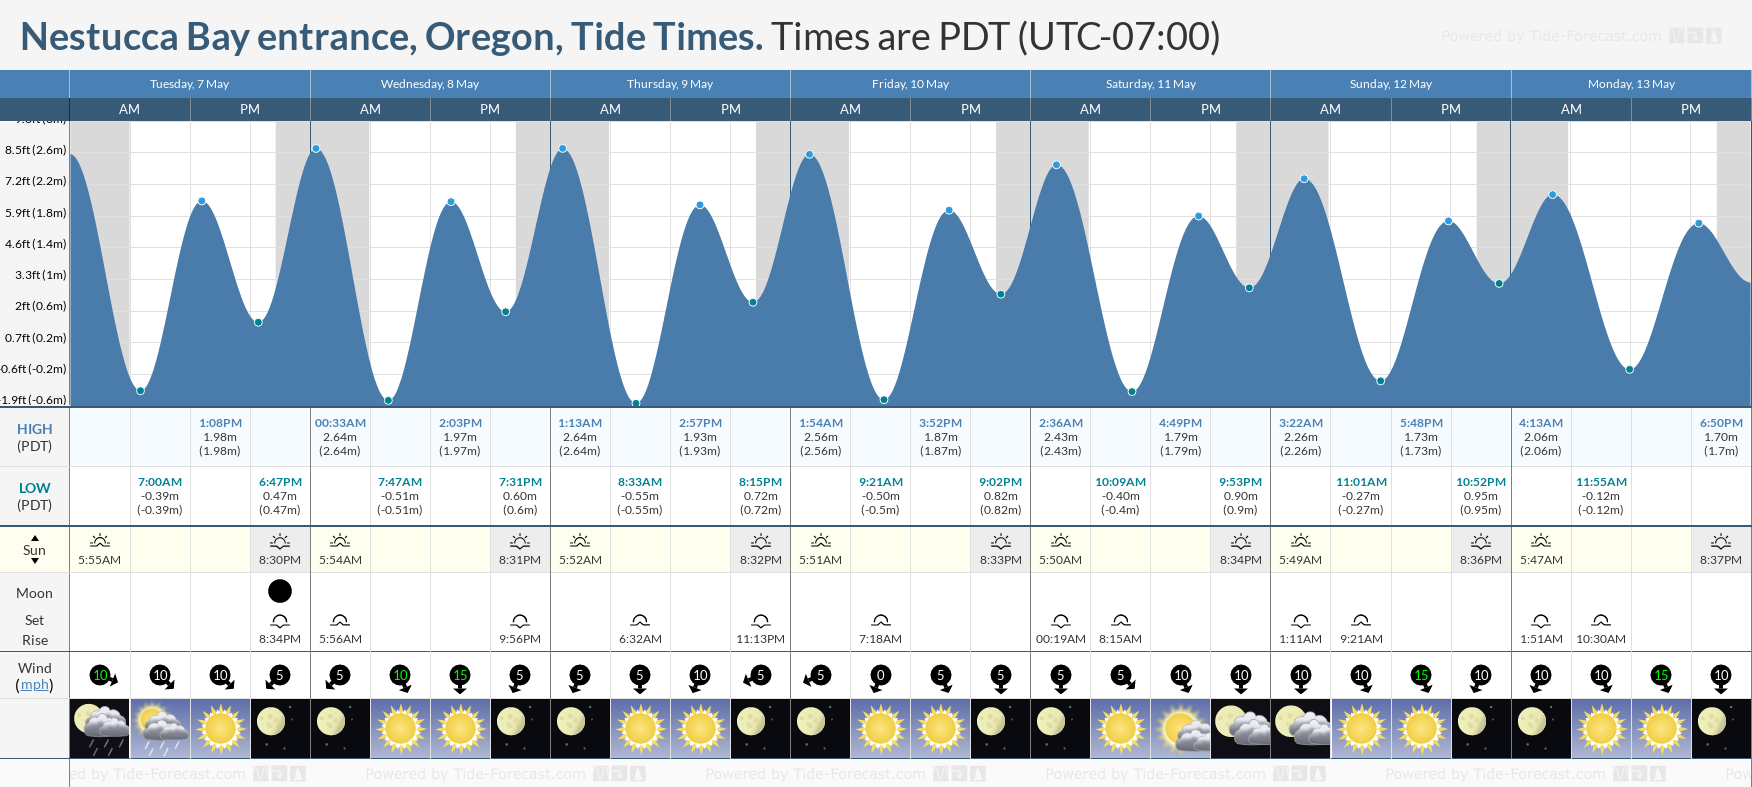 Nestucca Bay entrance, Oregon Tide Chart including high and low tide tide times for the next 7 days